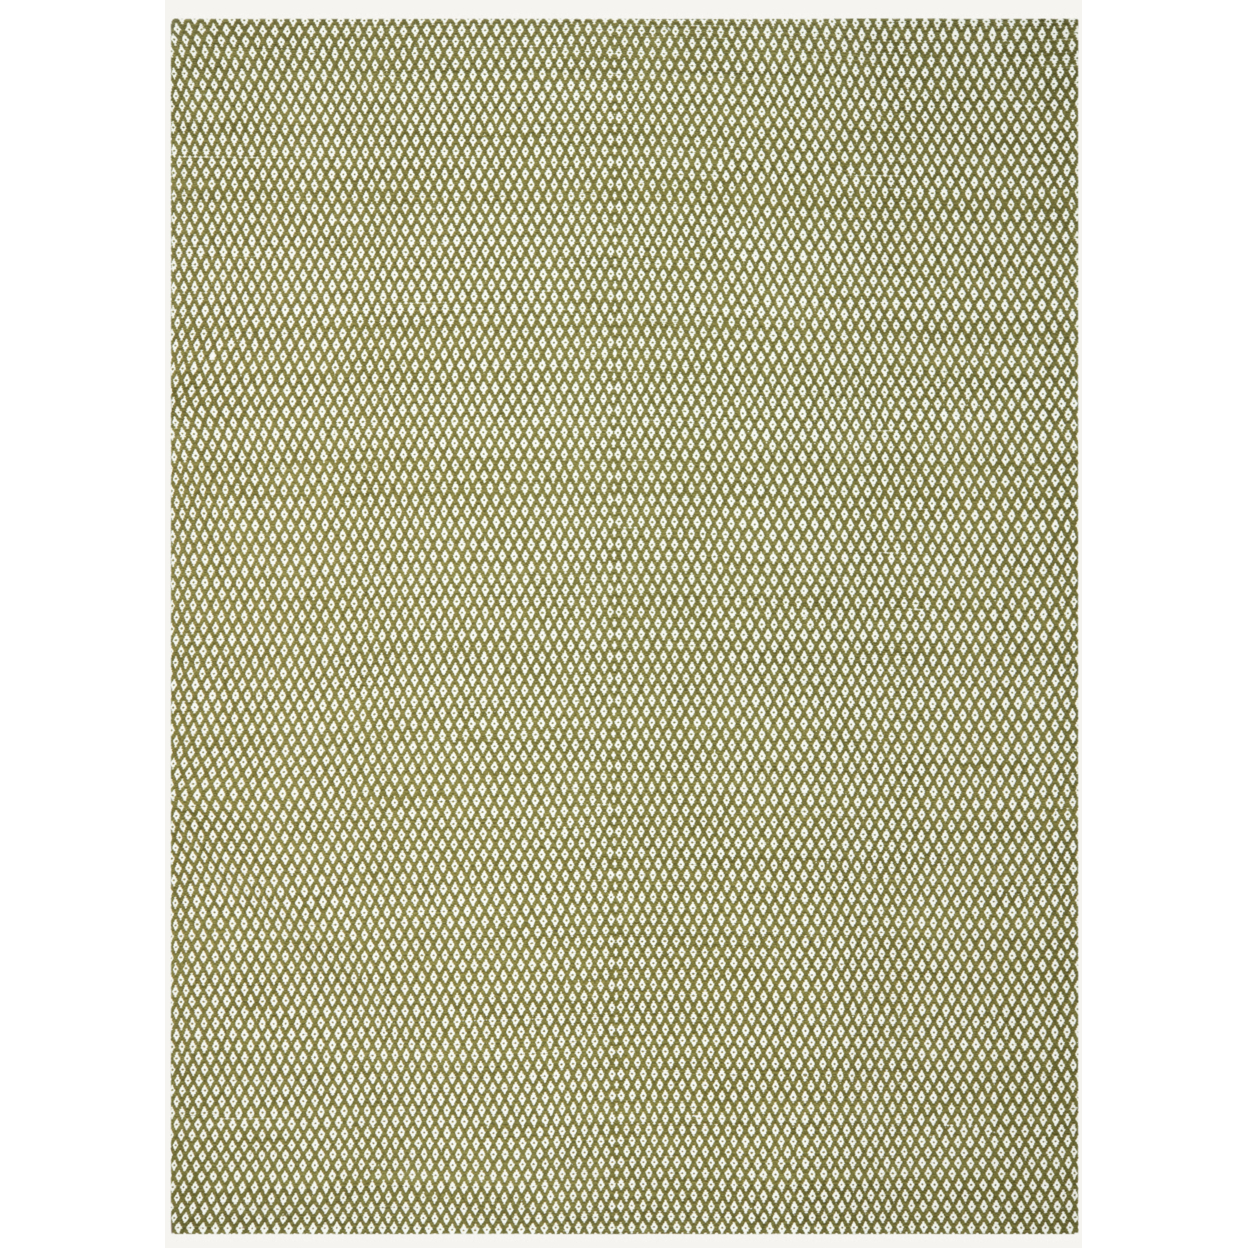 SAFAVIEH Boston Collection BOS685B Handwoven Olive Rug - 8' X 10'